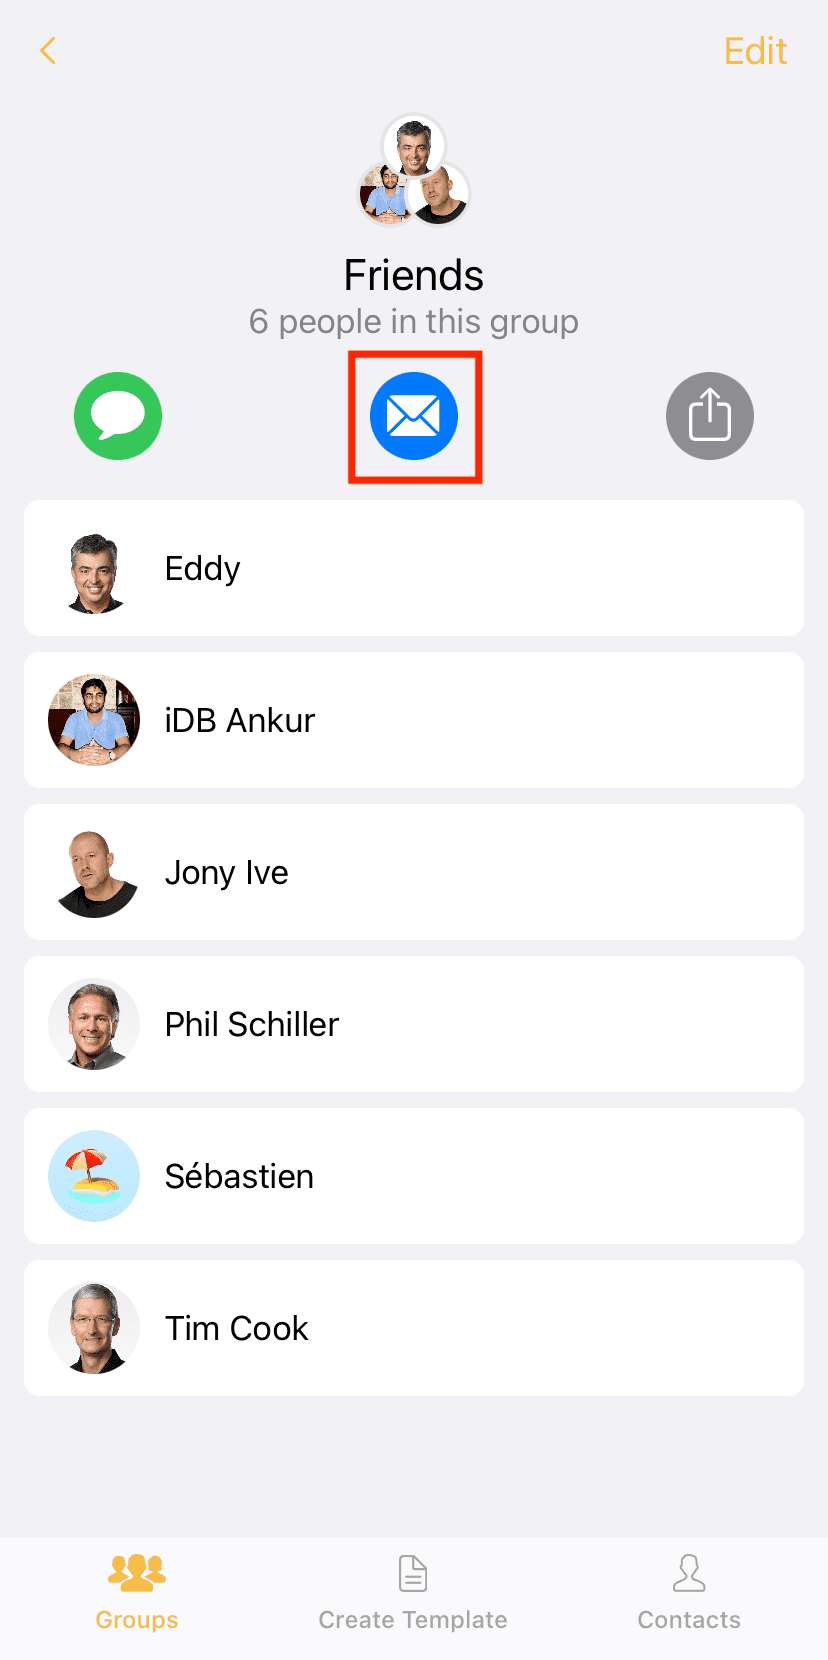 Tab blue Mail button to send group email on iPhone